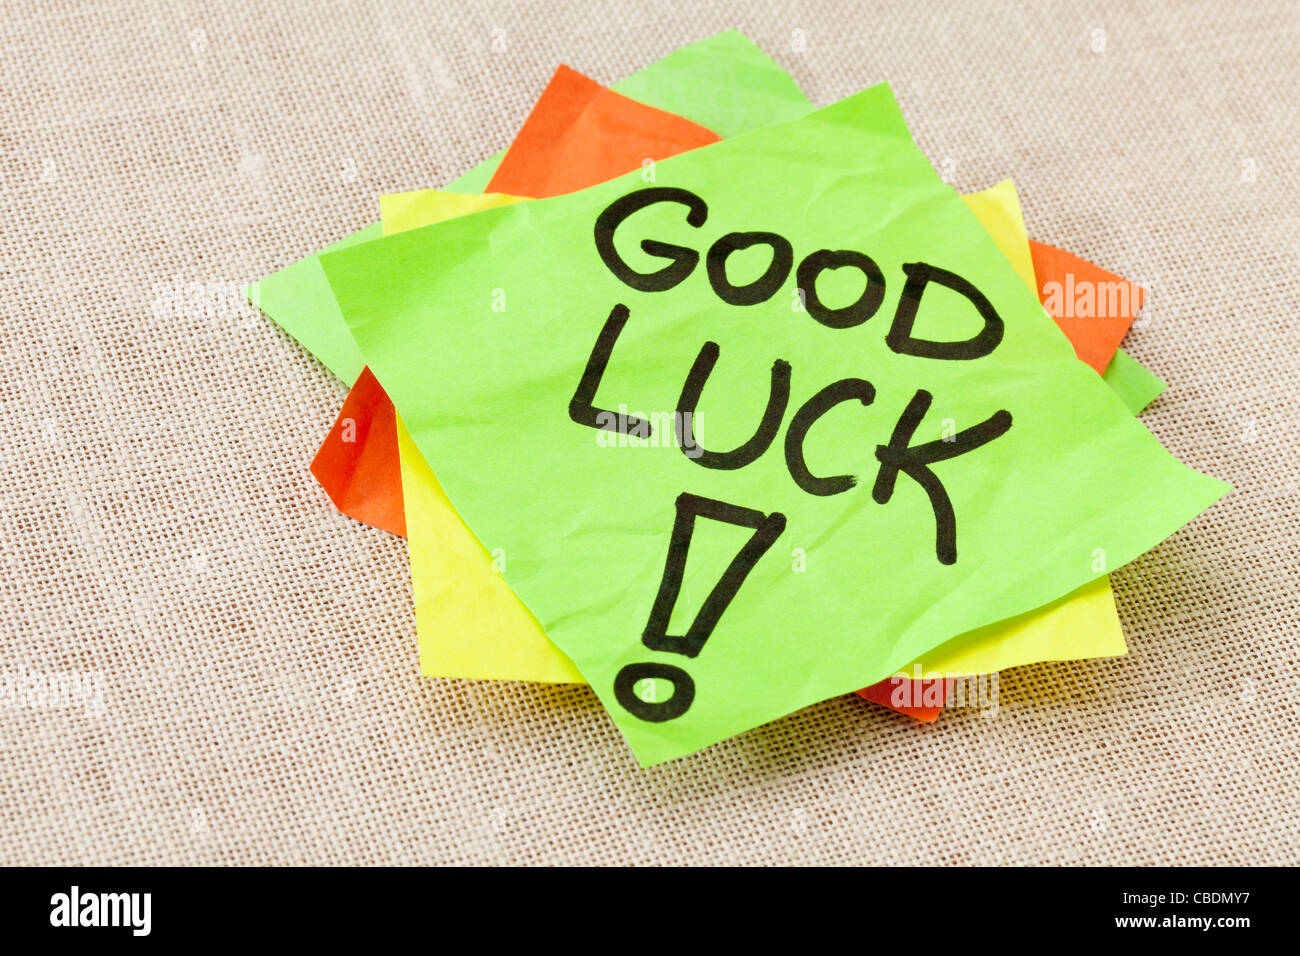 Good luck - black handwriting on green sticky note against canvas Stock Photo